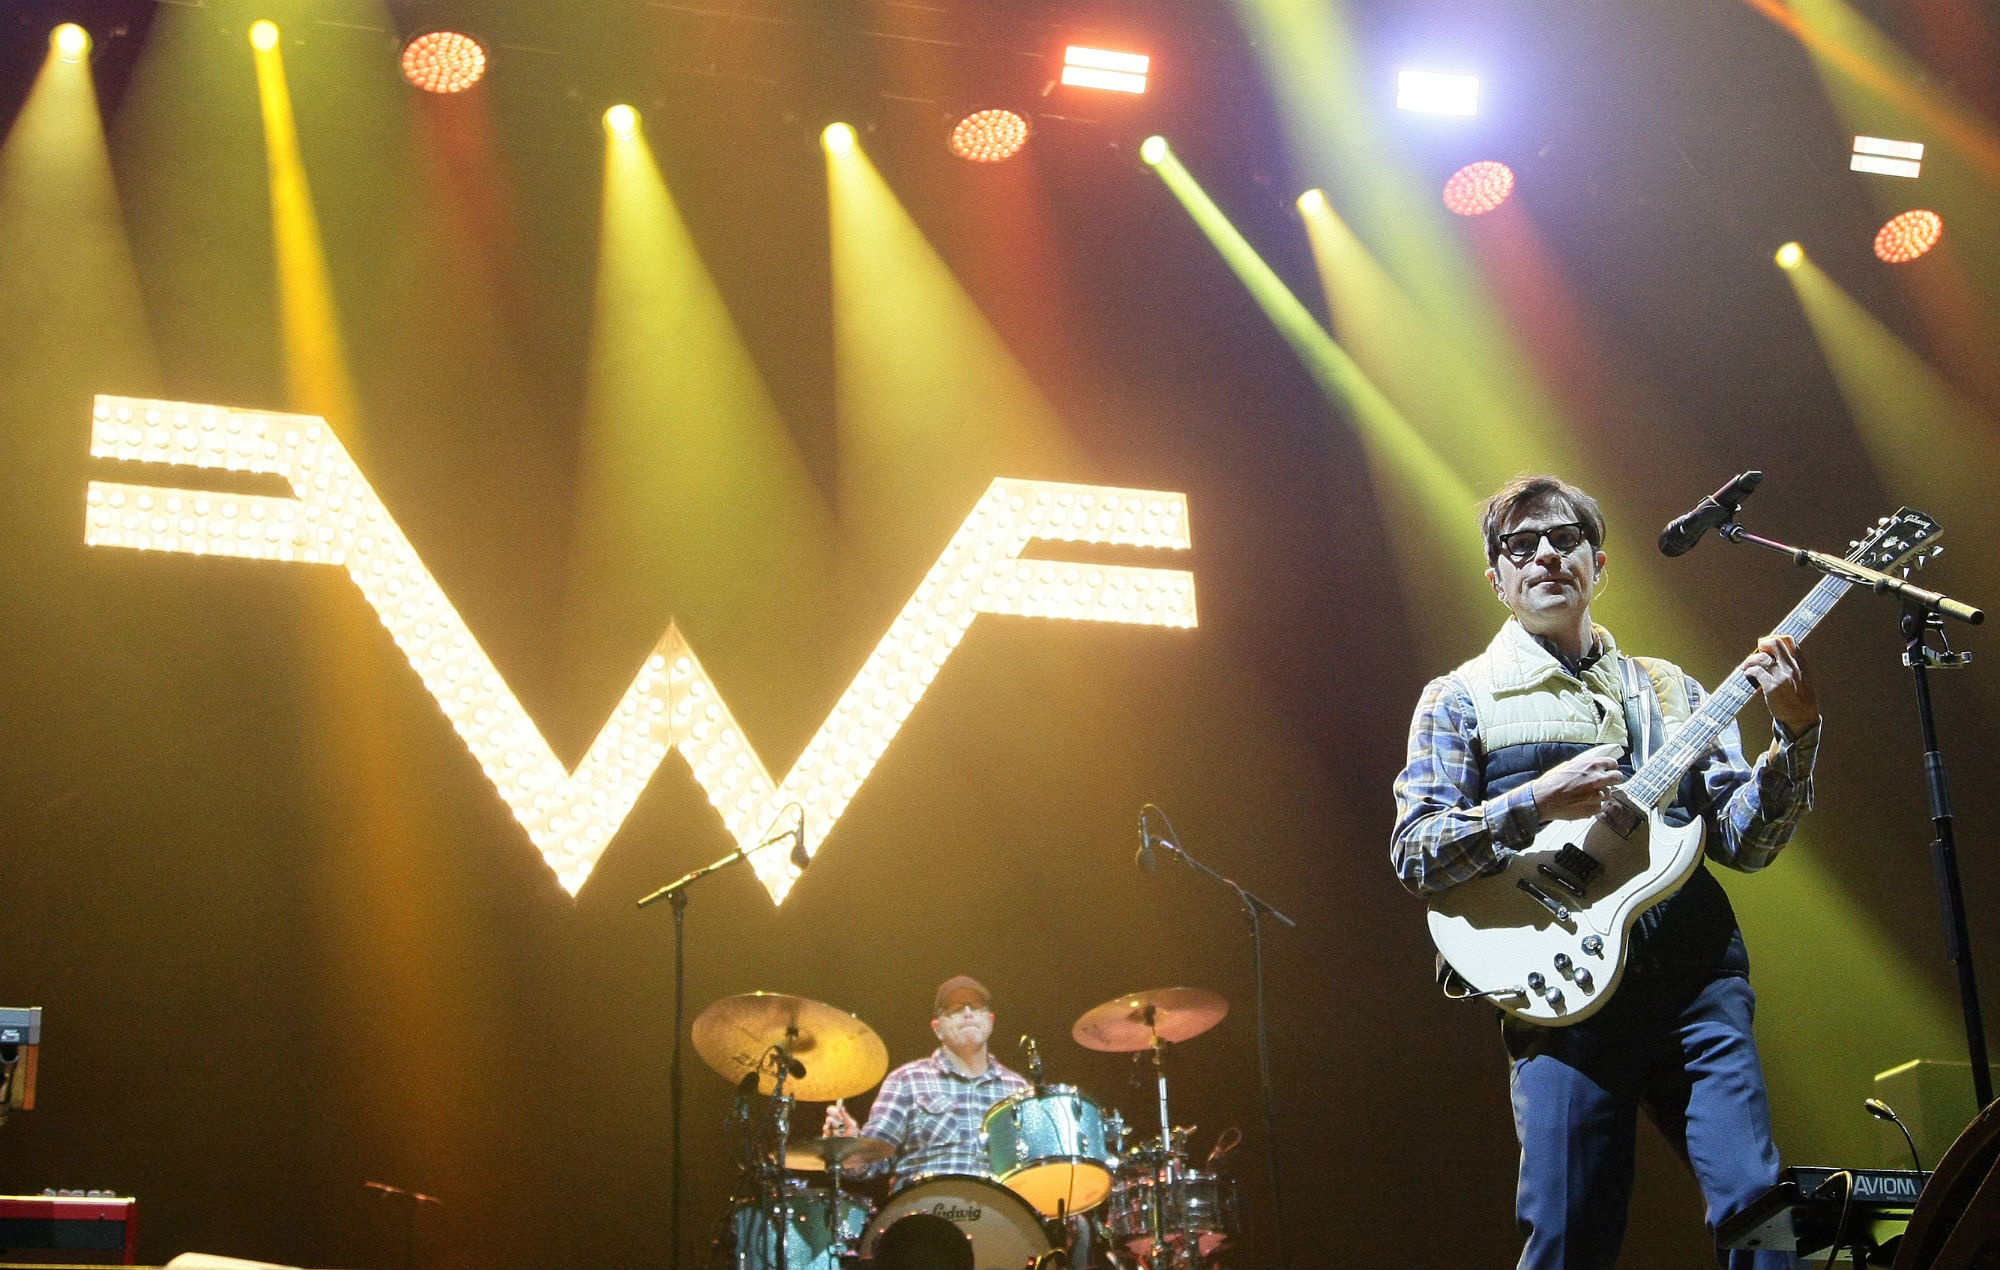 Weezer, Alternative rock icons, Music news and updates, Relevant industry insights, 2000x1270 HD Desktop